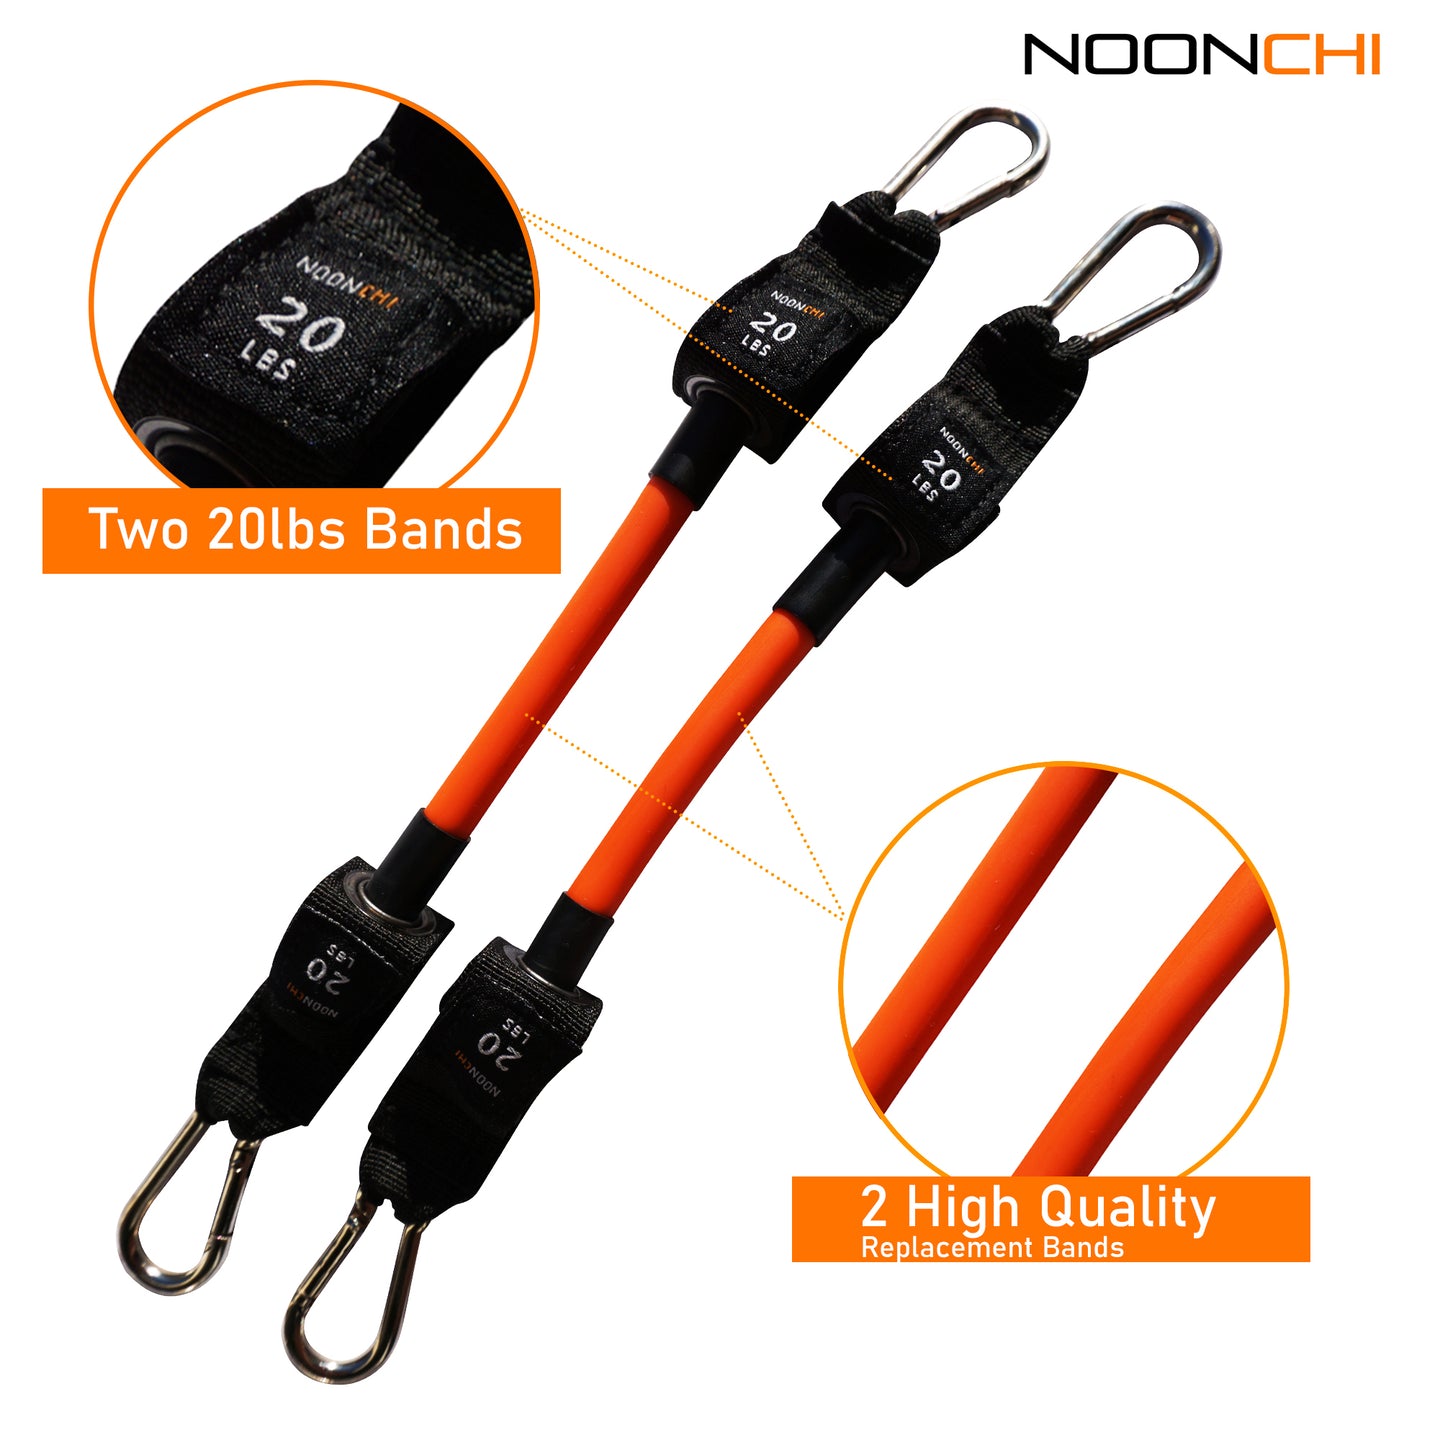 Noonchi replacement 20 lb band set